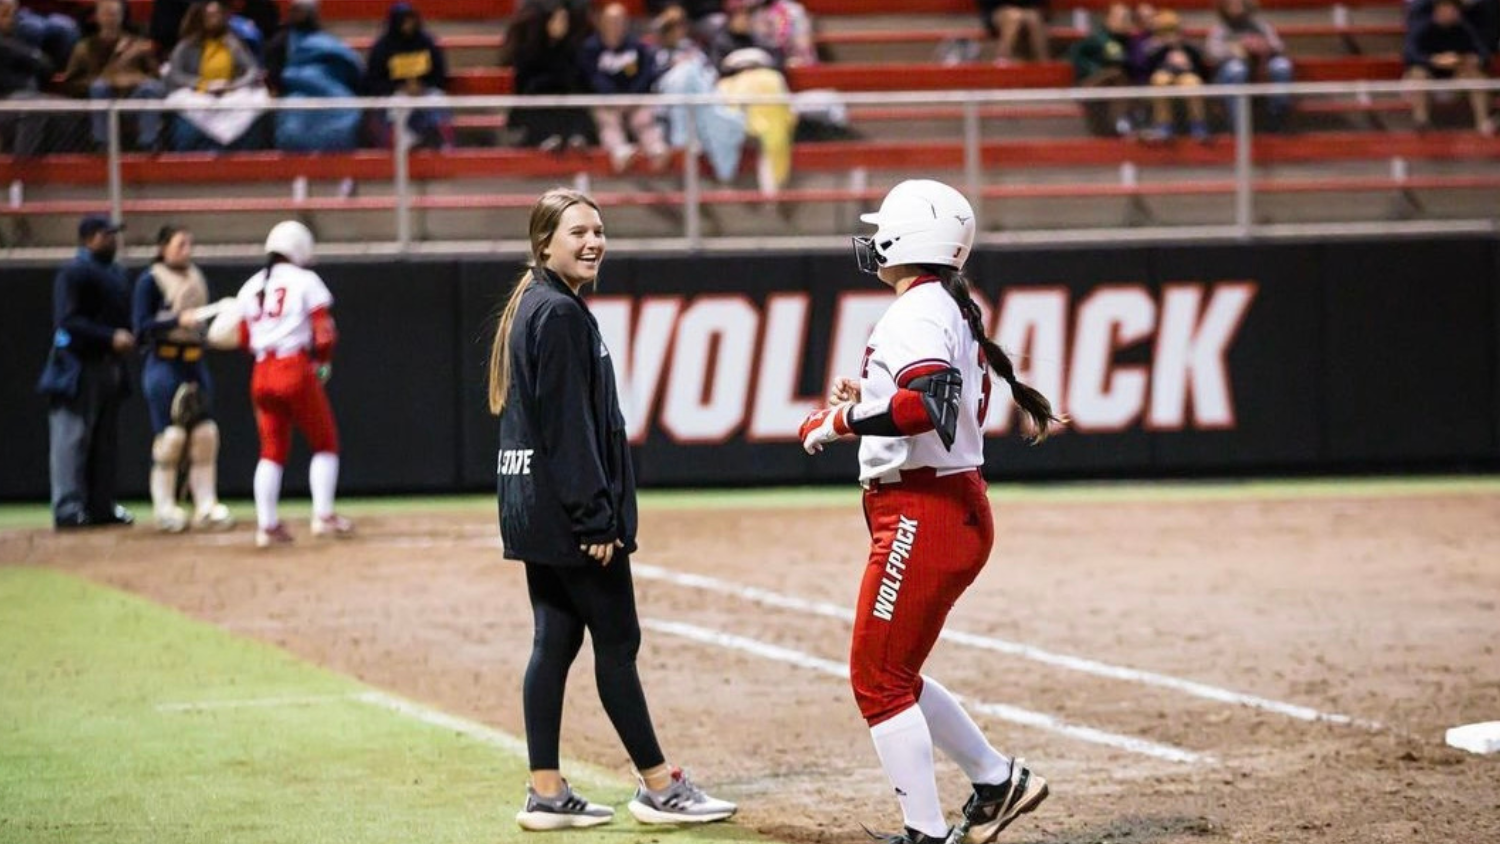 Carson Shaner talks to a softball player on the field.